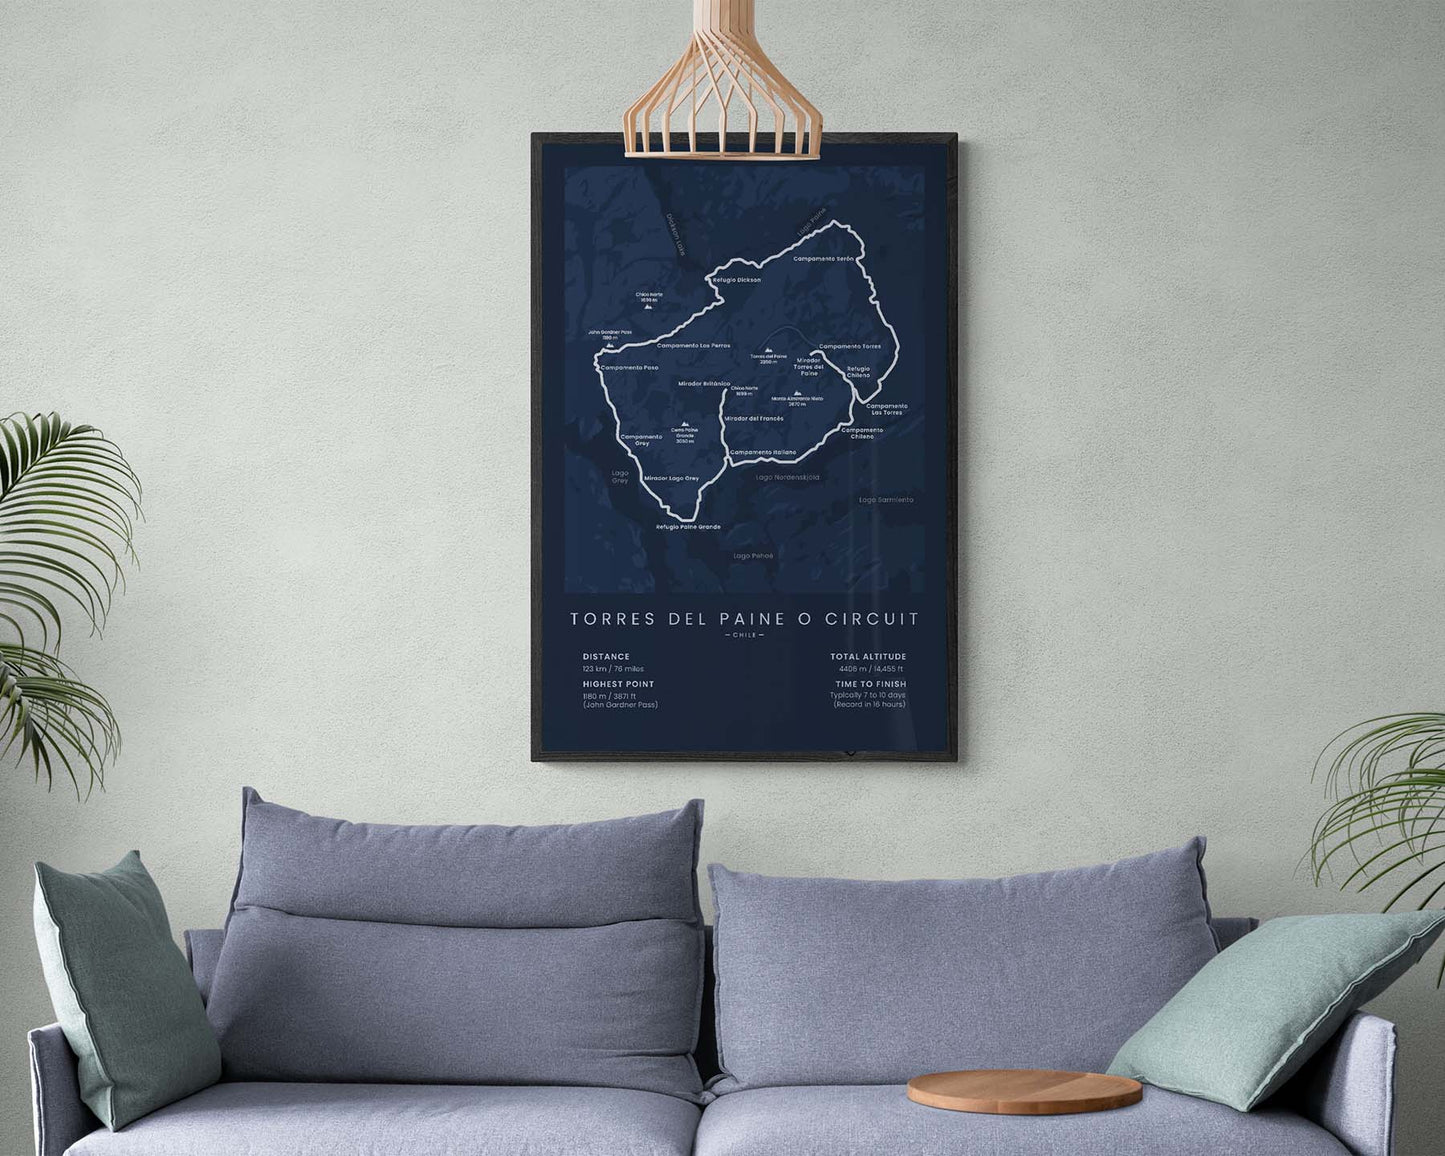 Patagonia O Circuit (Andes) path poster in minimal room decor